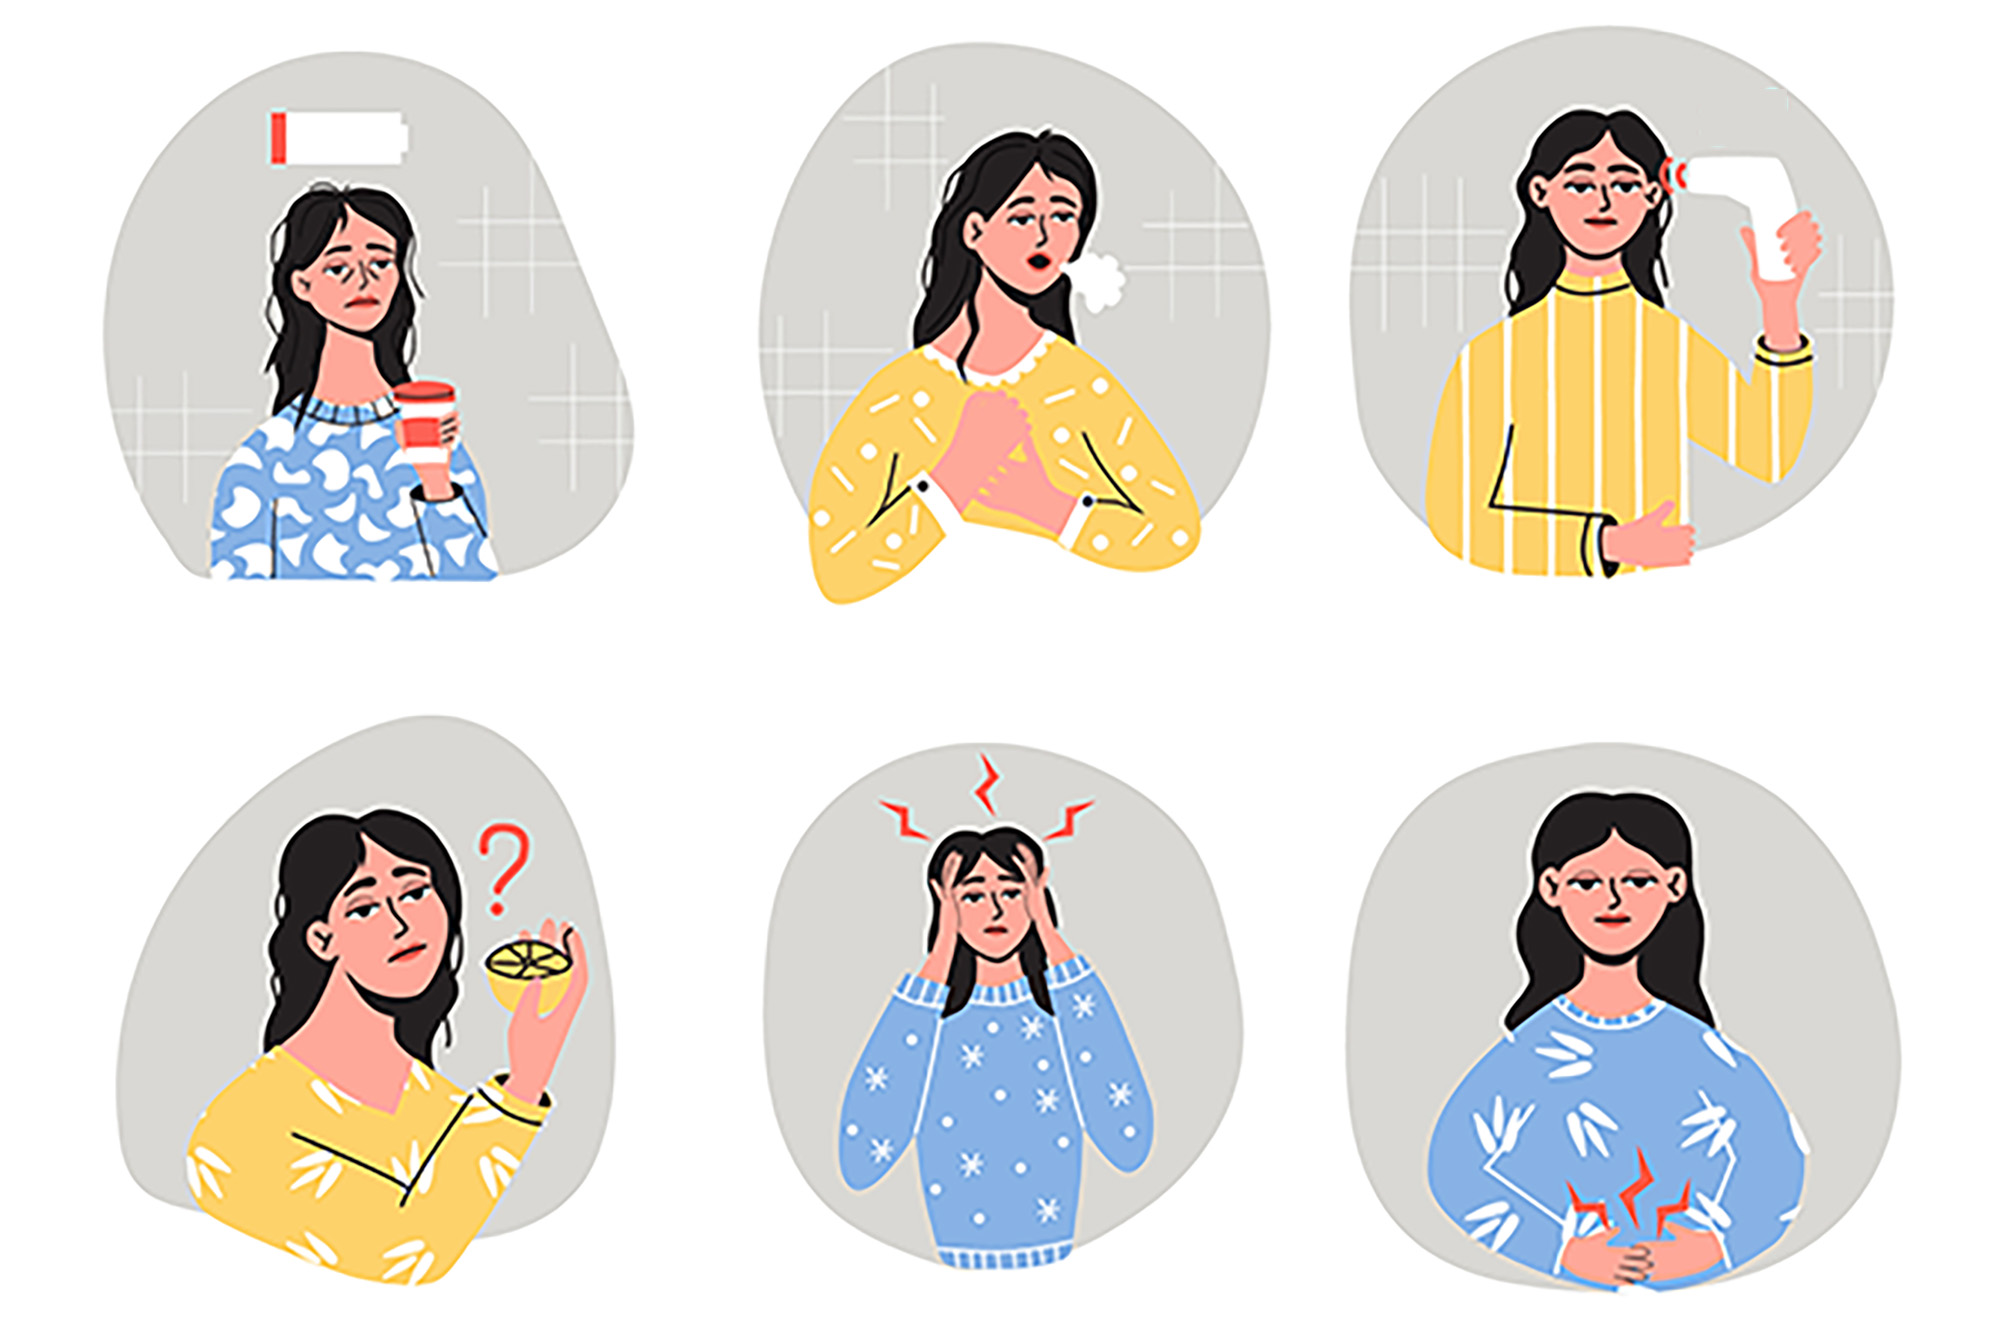 Image: Vector illustration showing Long-term effects of covid-19 or post covid syndrome. Depression, dyspnea, arrhythmia, eczema, indigestion and others symptoms are shown with a person expressing/miming them in various ways in six different bubbles on a white background.